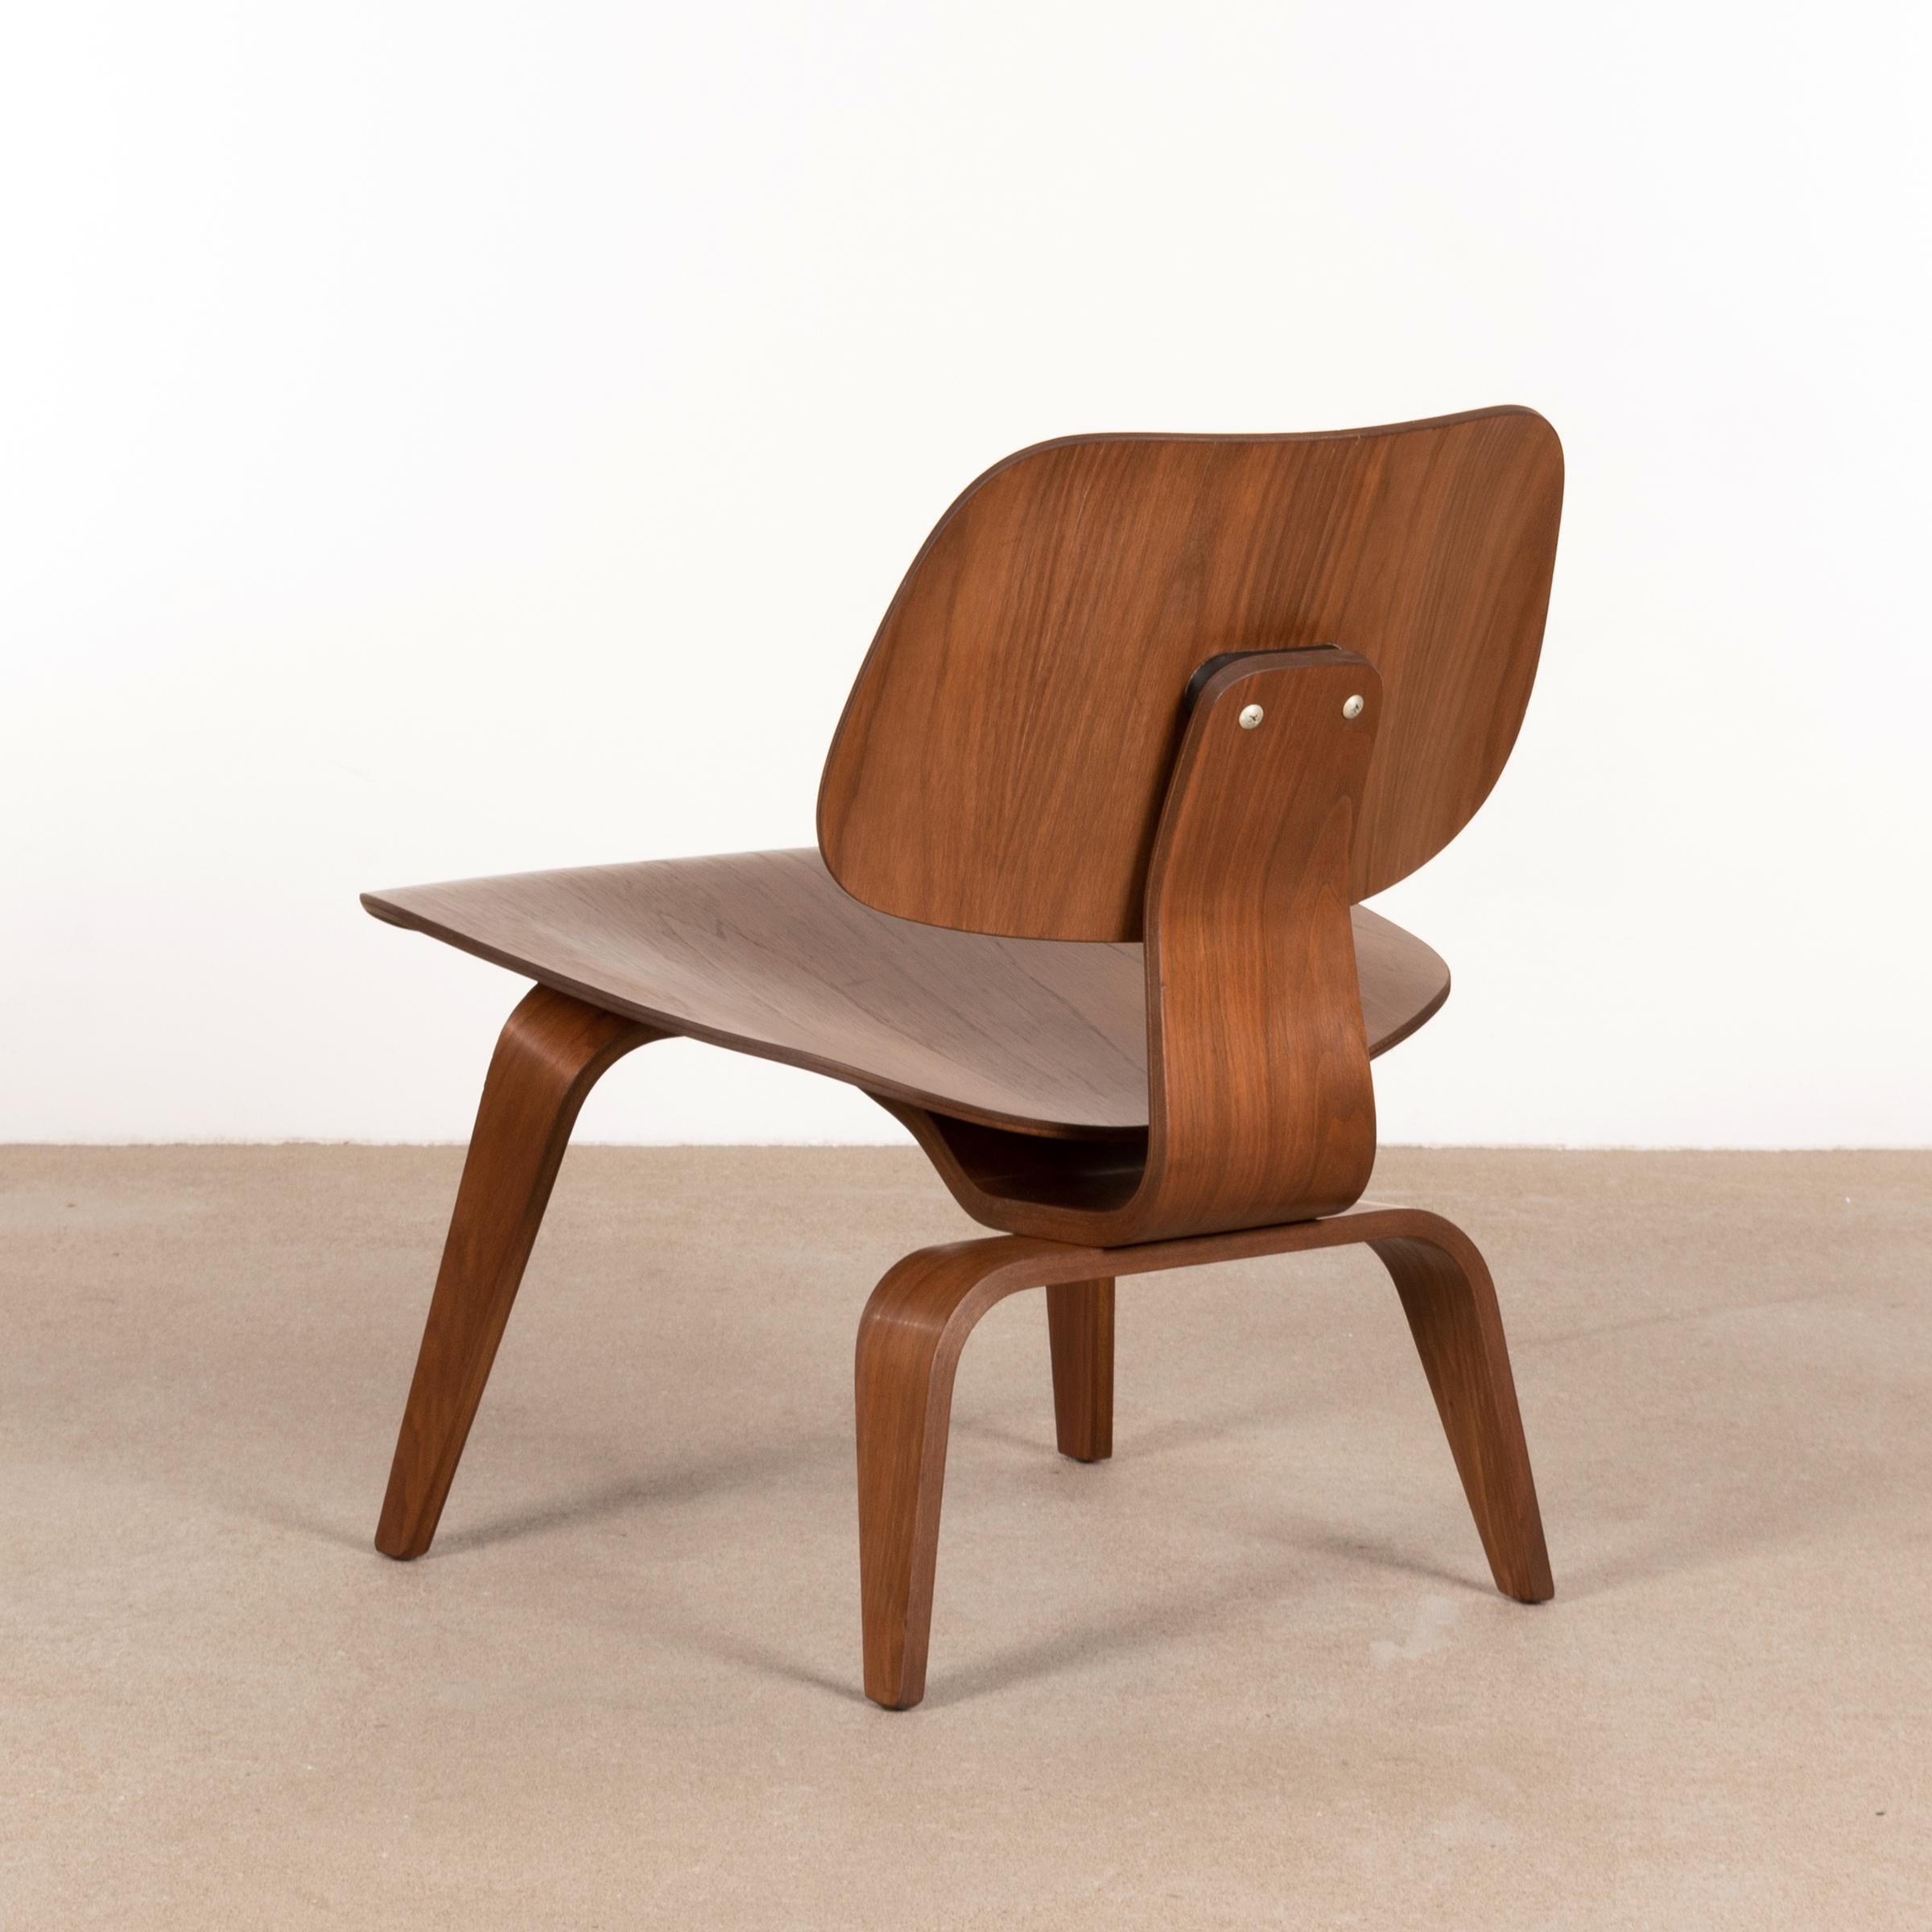 American Charles & Ray Eames Early LCW Walnut Lounge Chair for Herman Miller